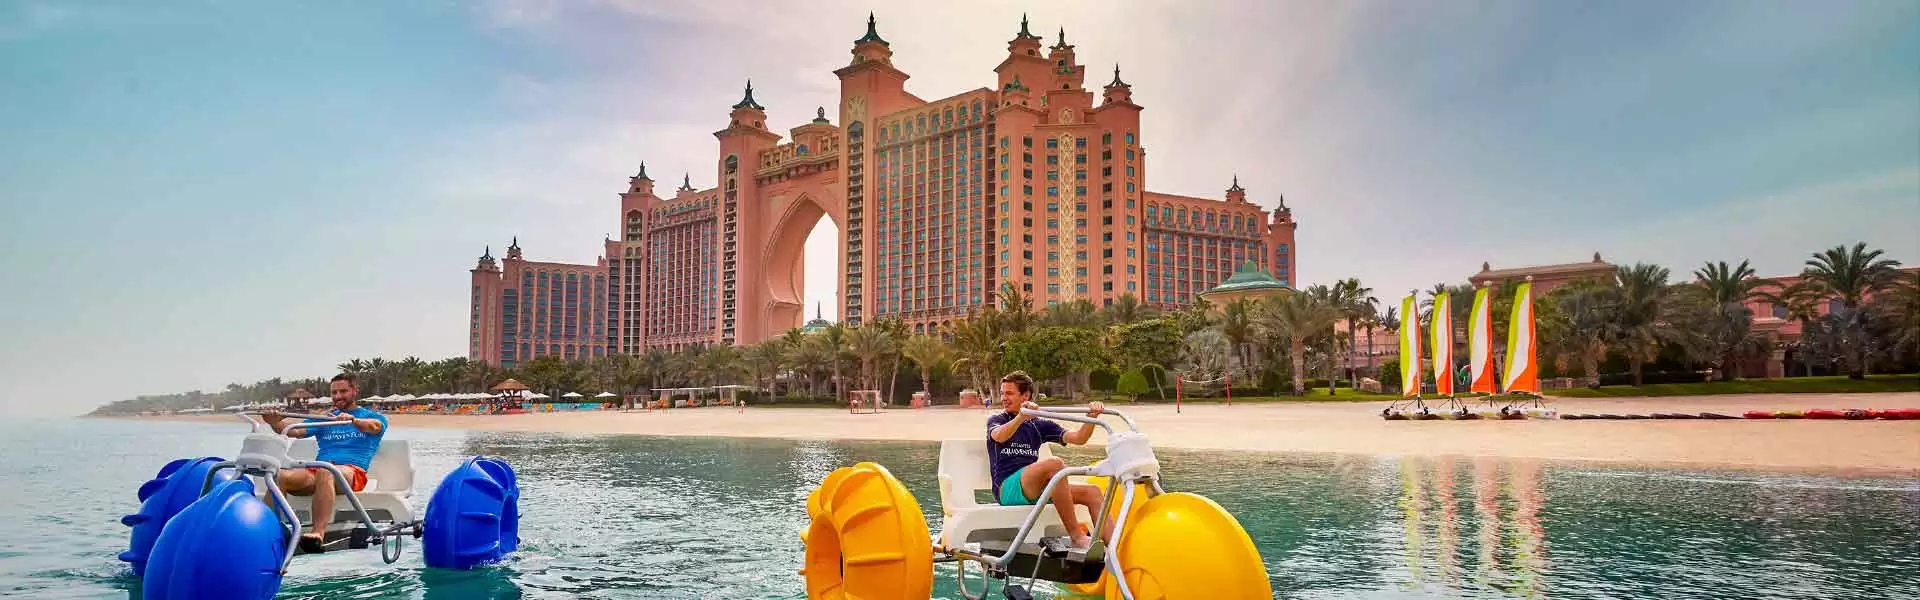 Banner image of Hotel Atlantis and tourist enjoying in the beach